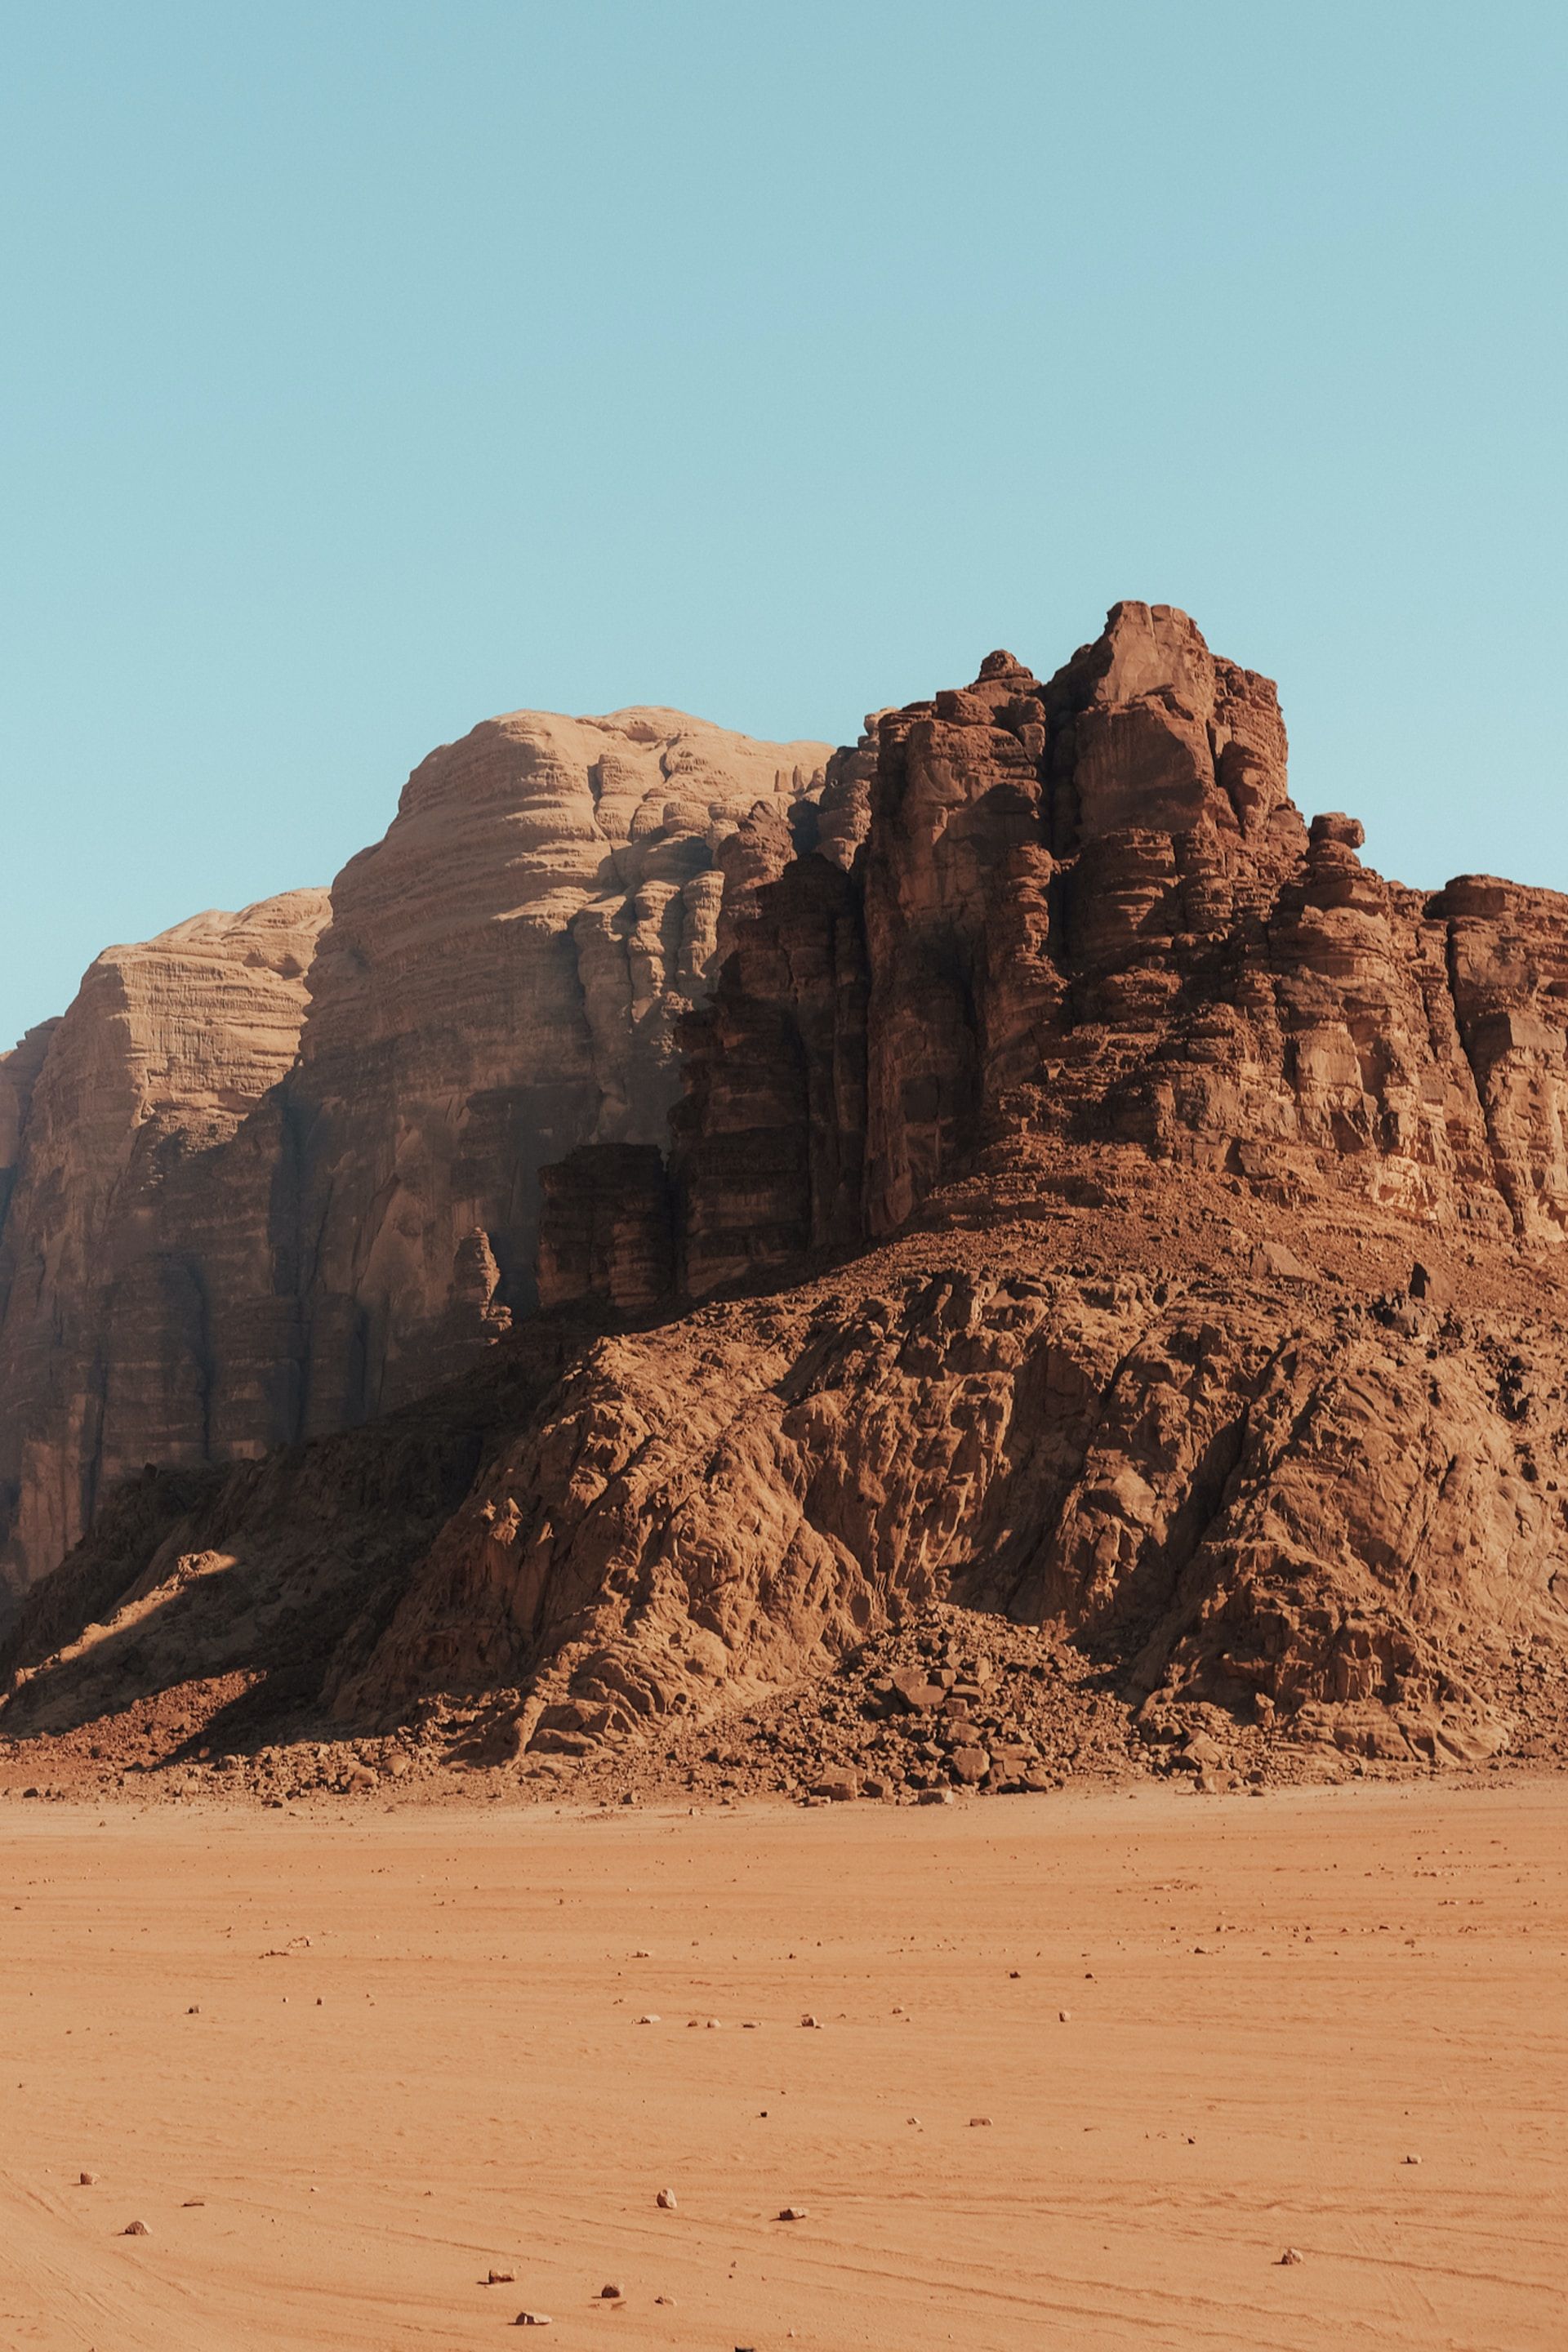 A large rock formation in the middle of a desert.